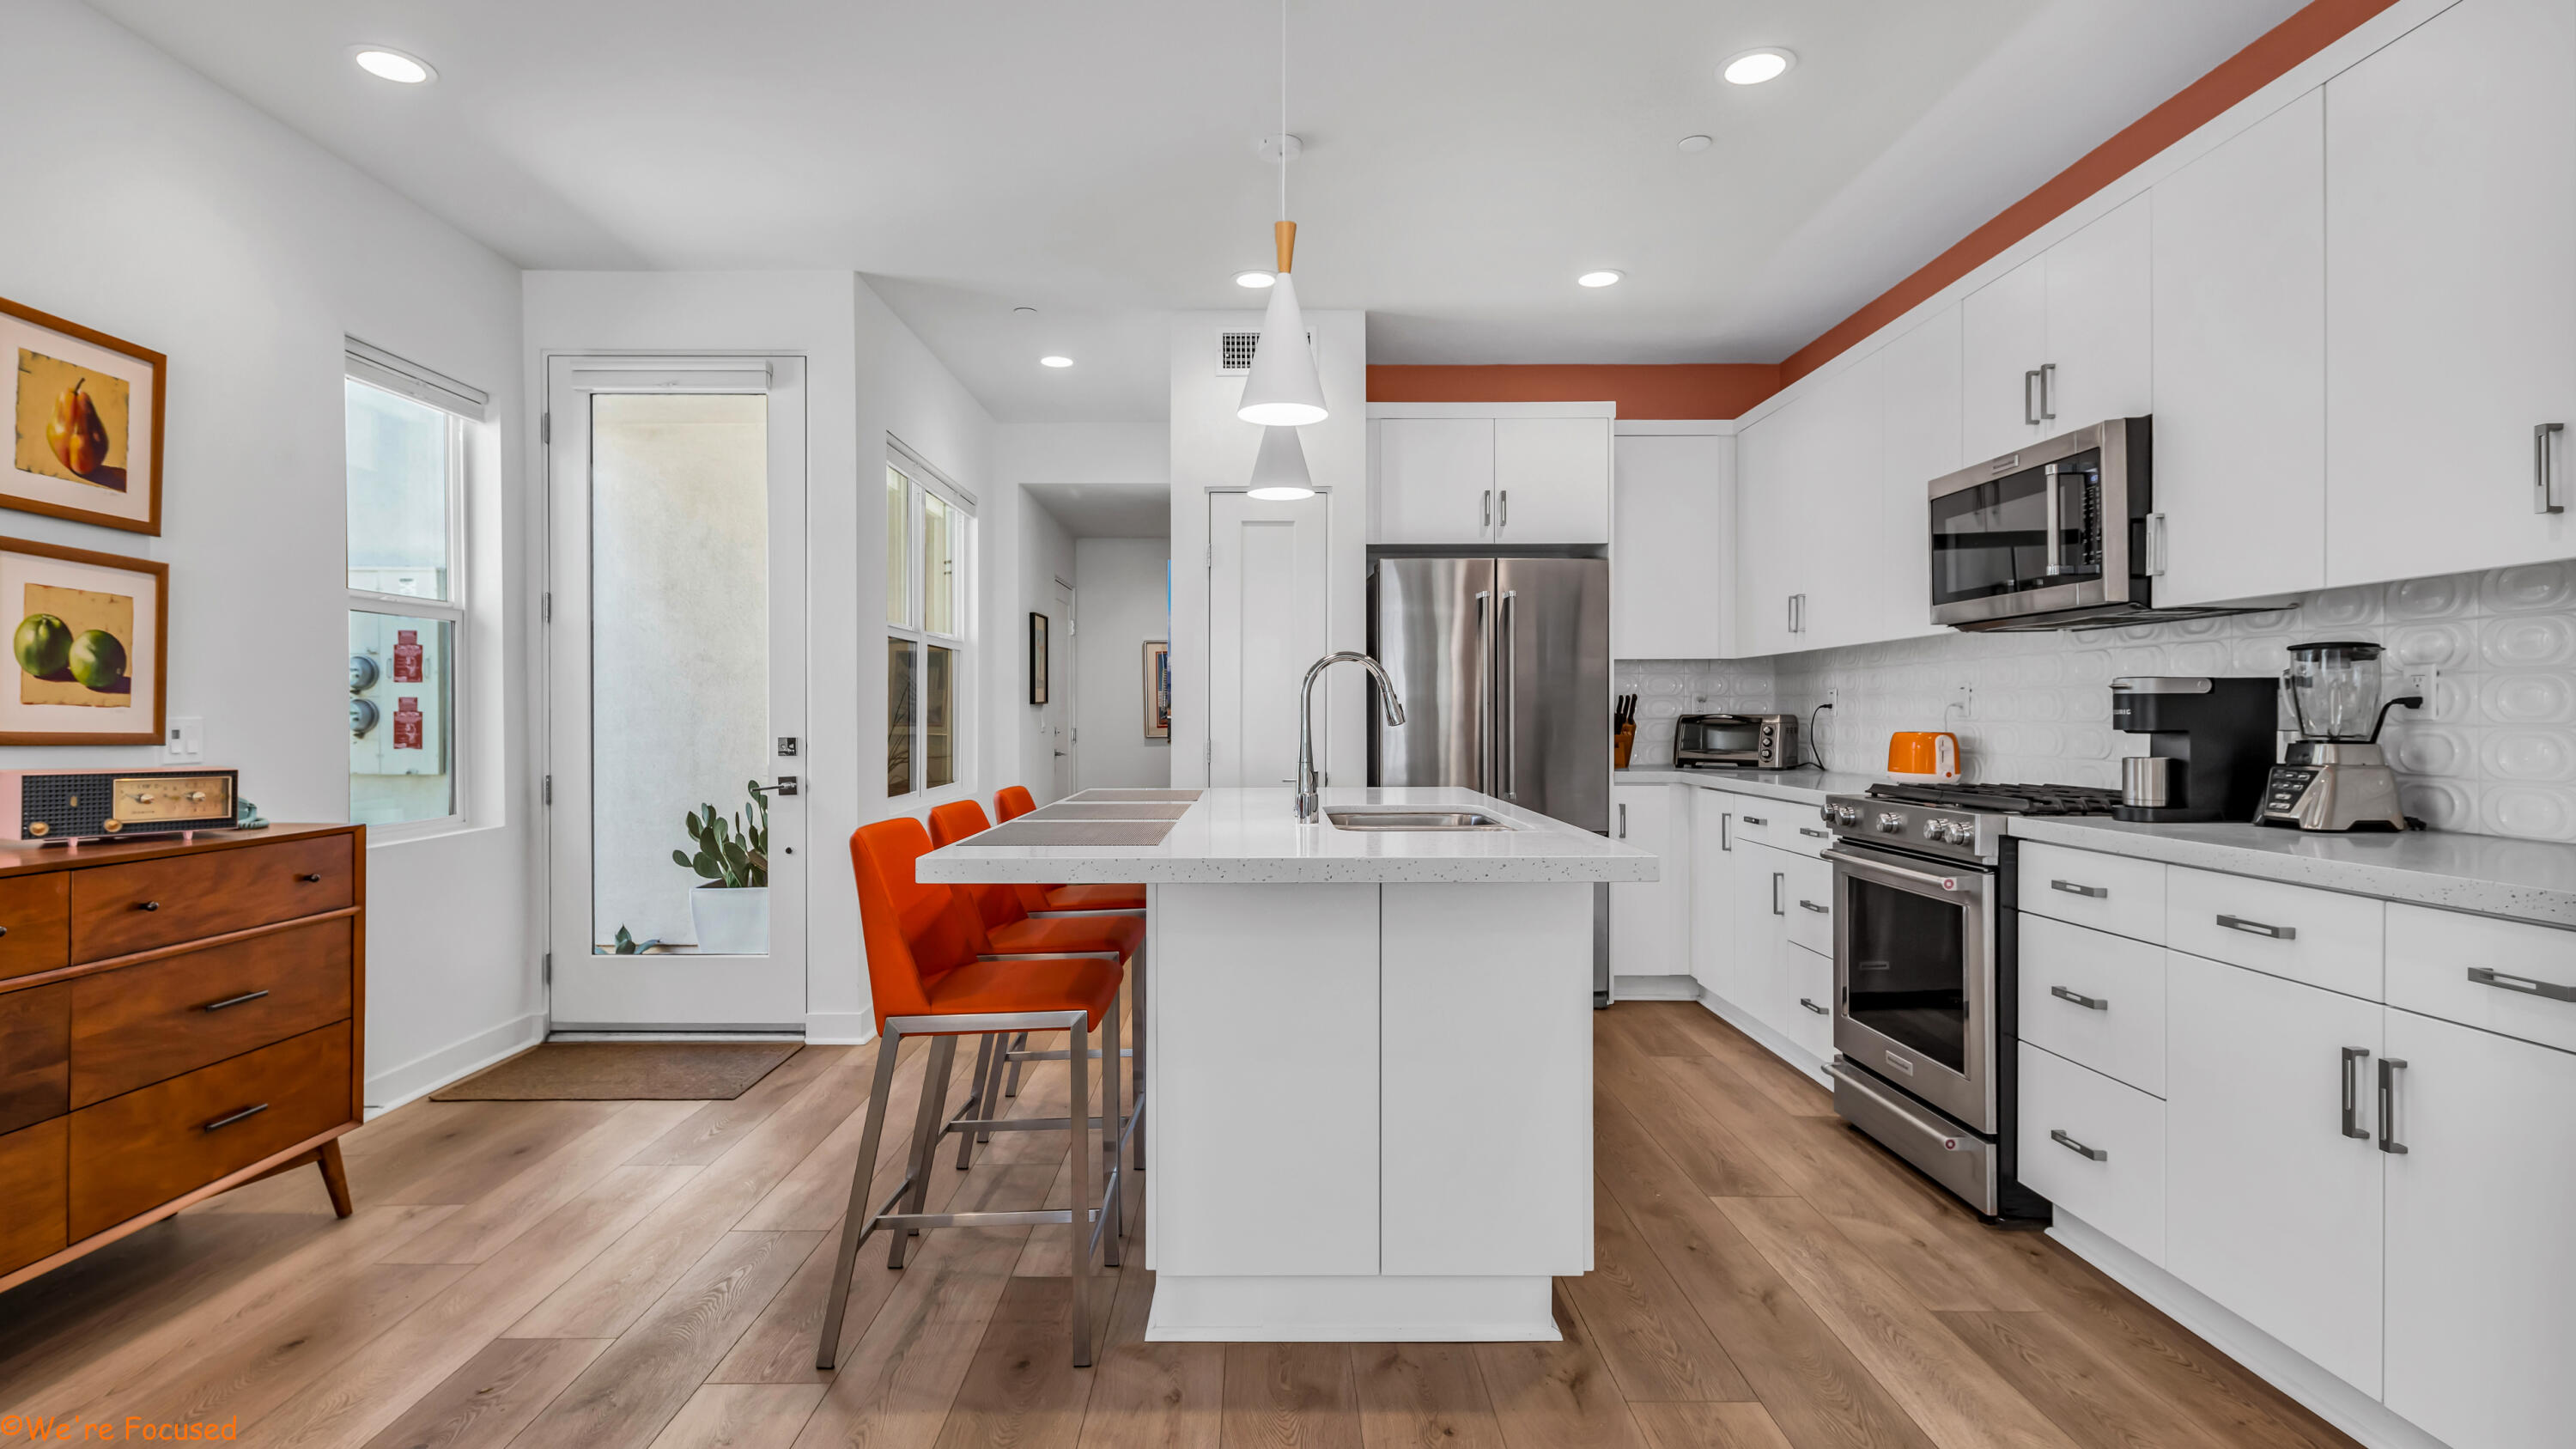 a kitchen with stainless steel appliances kitchen island granite countertop a refrigerator a stove top oven a sink dishwasher and white cabinets with wooden floor